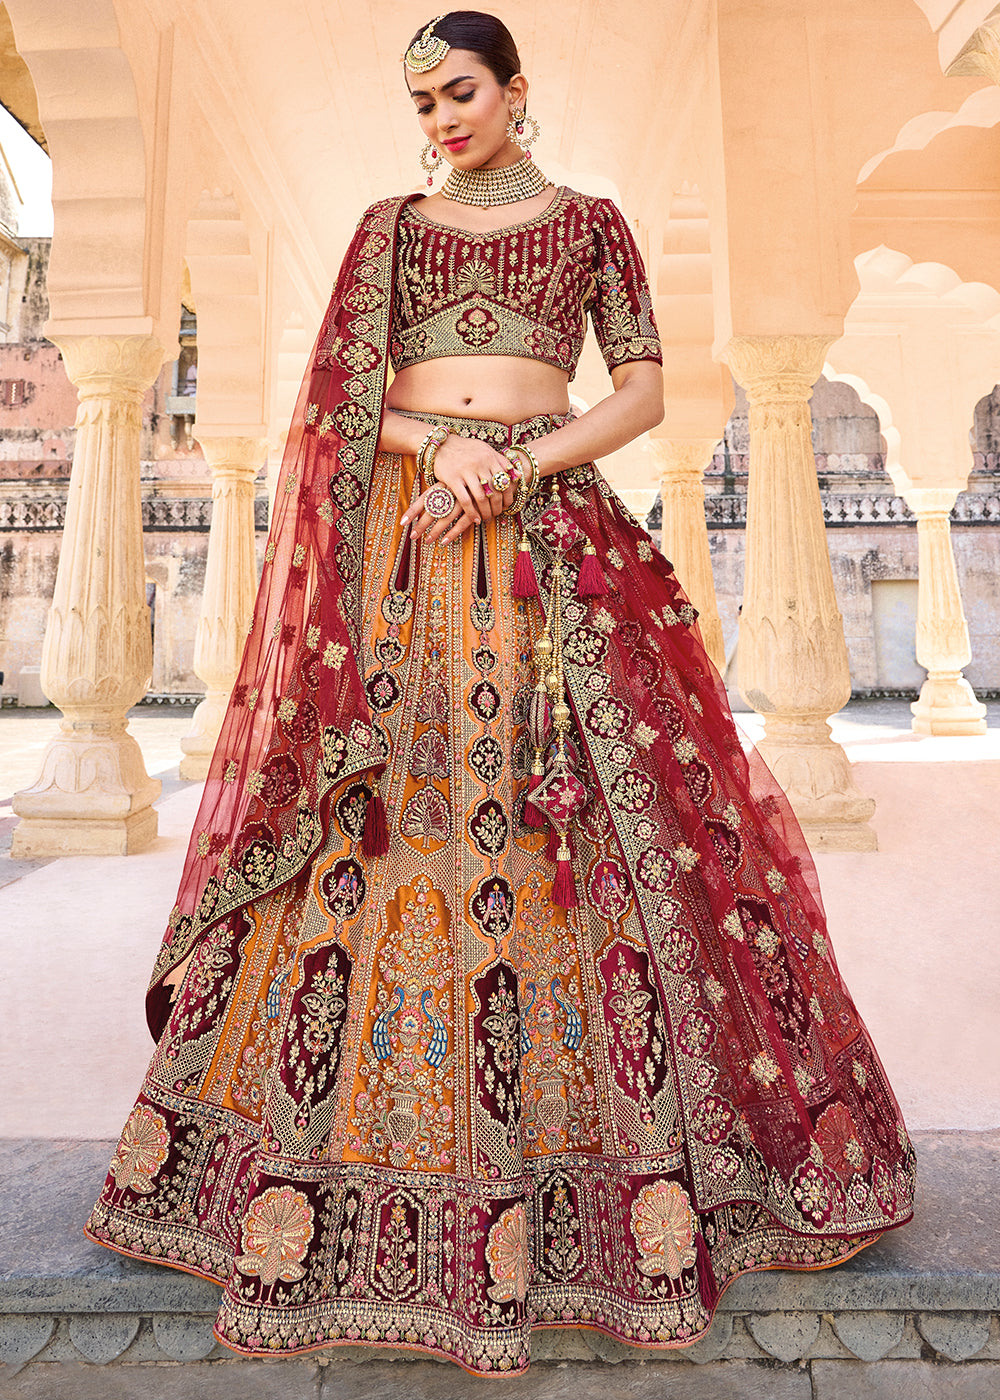 Full 4K Collection of Over 999 Designer Lehengas – Spectacular Images